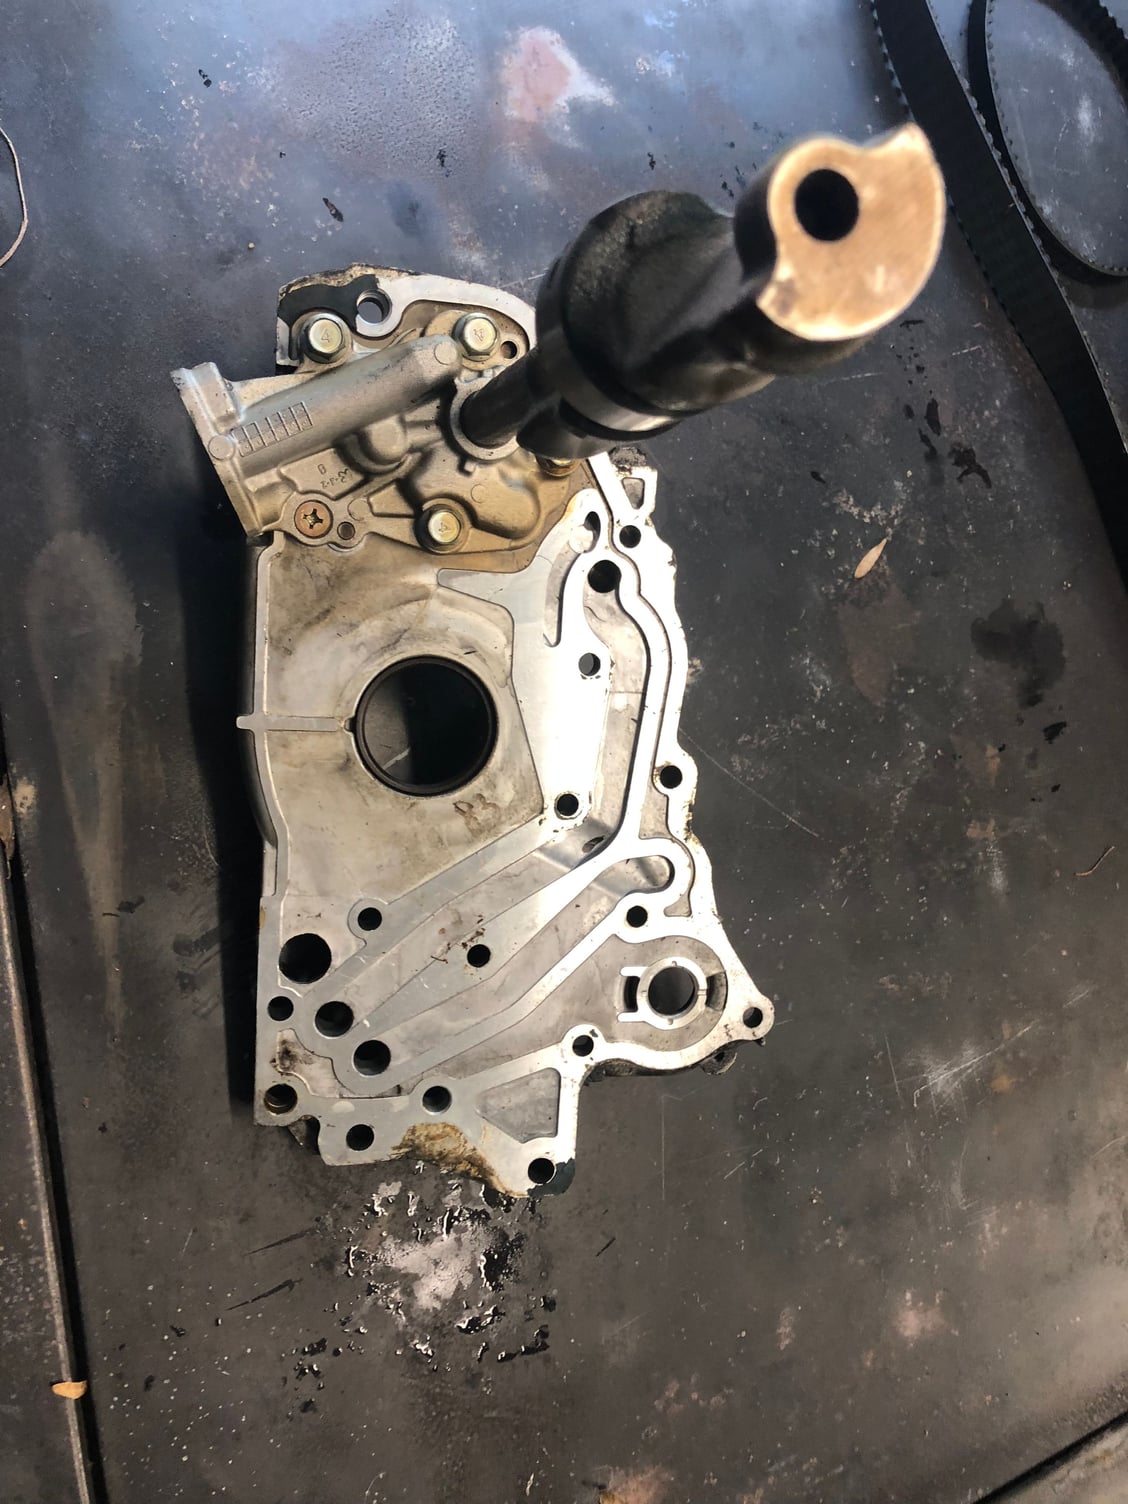 Engine - Internals - Garage clean out, help fund my build! - Used - 2003 to 2006 Mitsubishi Lancer Evolution - Knoxville, TN 37920, United States